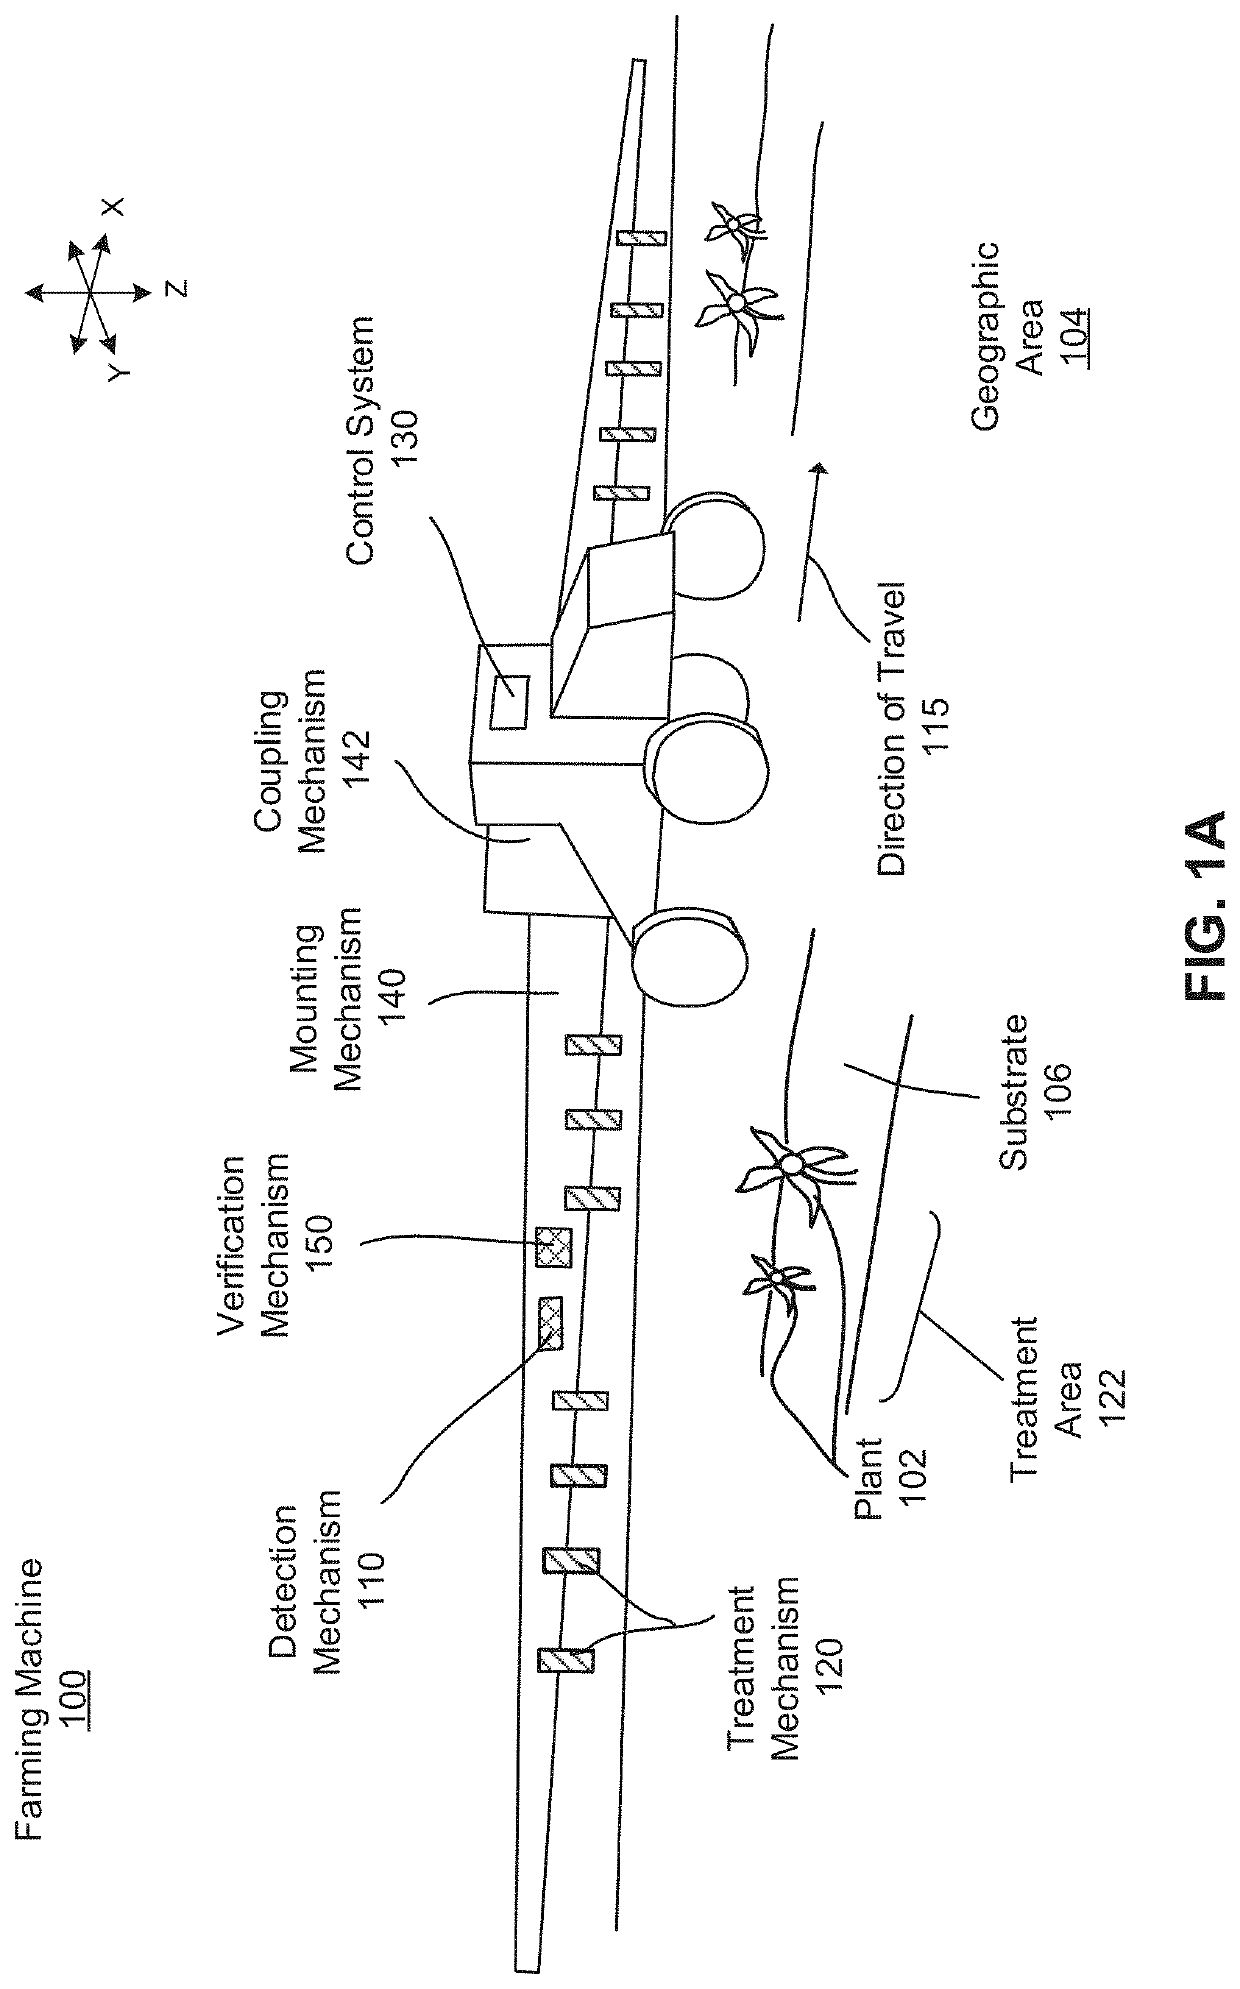 Automated nozzle adjustments for plant treatment application